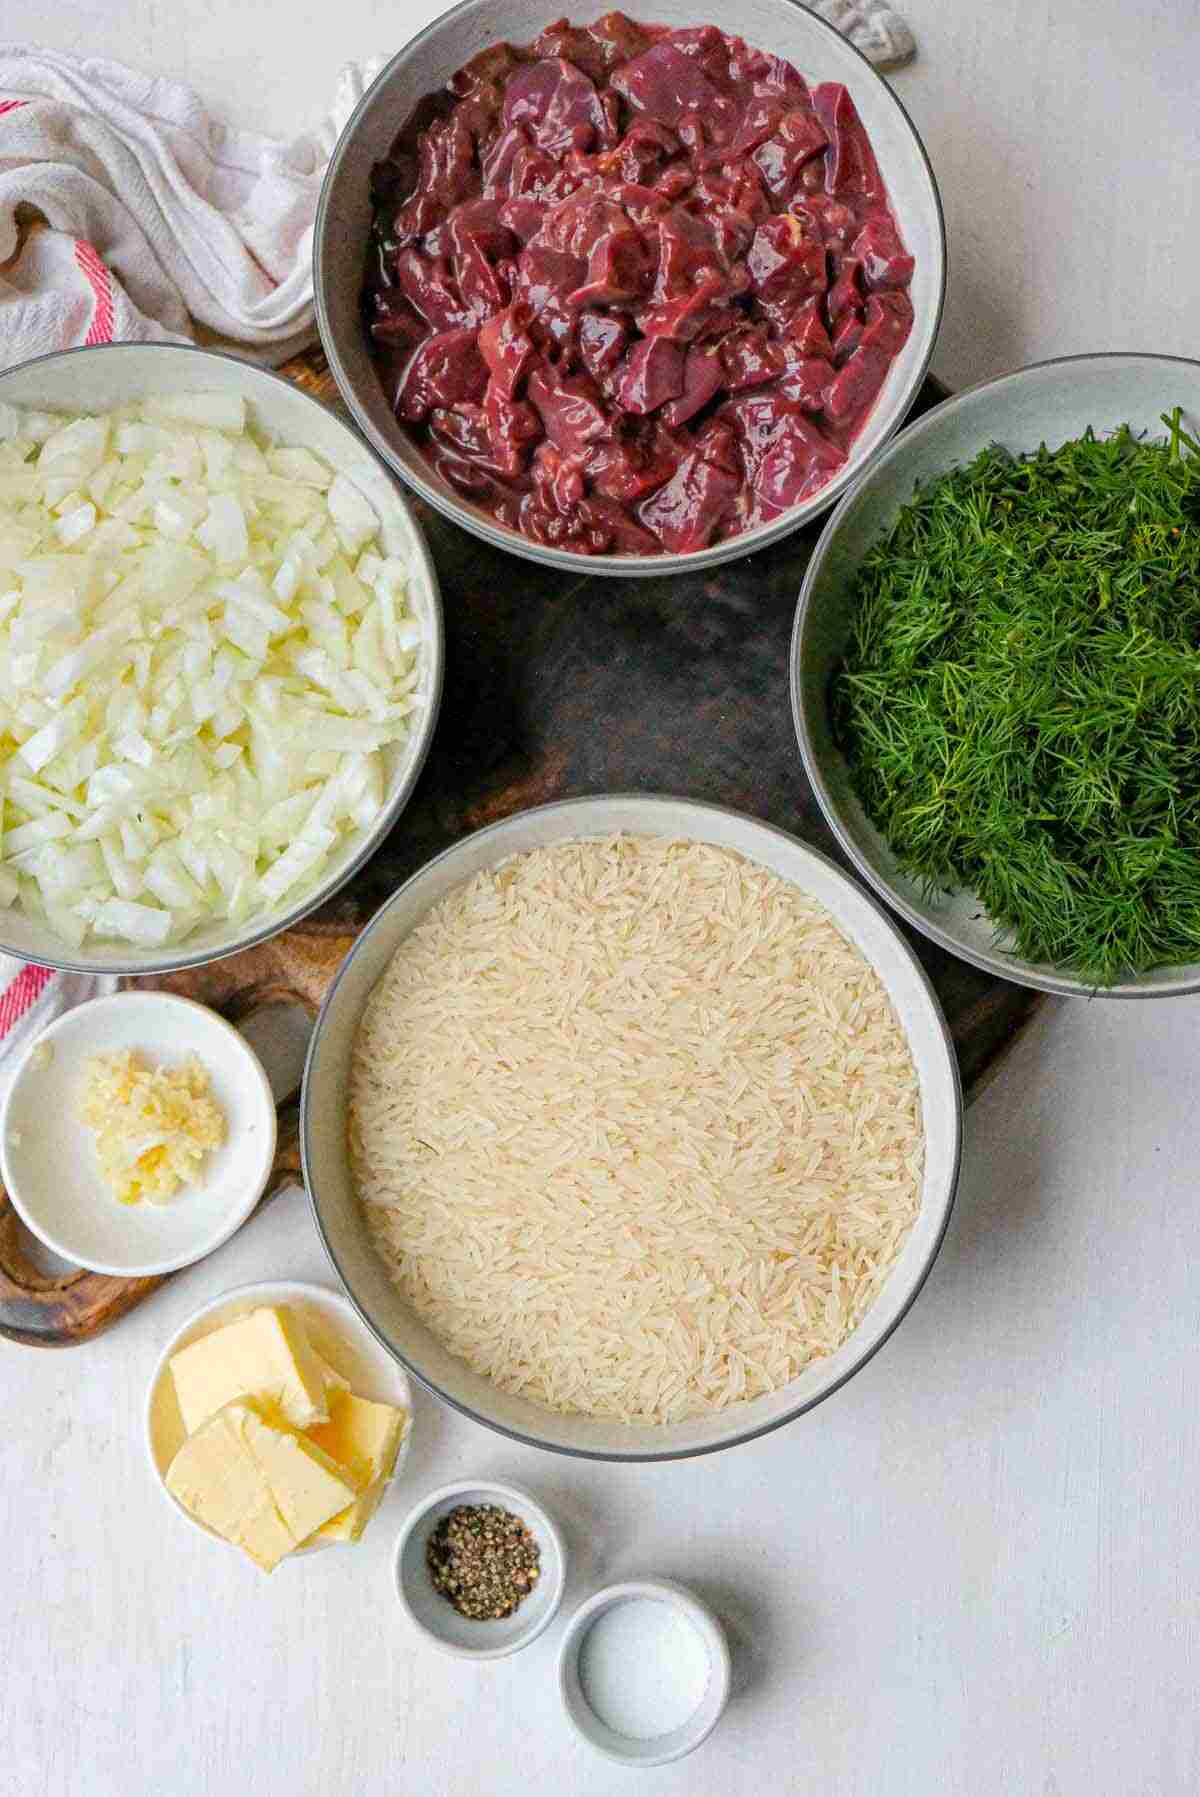 prepared ingredients for dill river rice